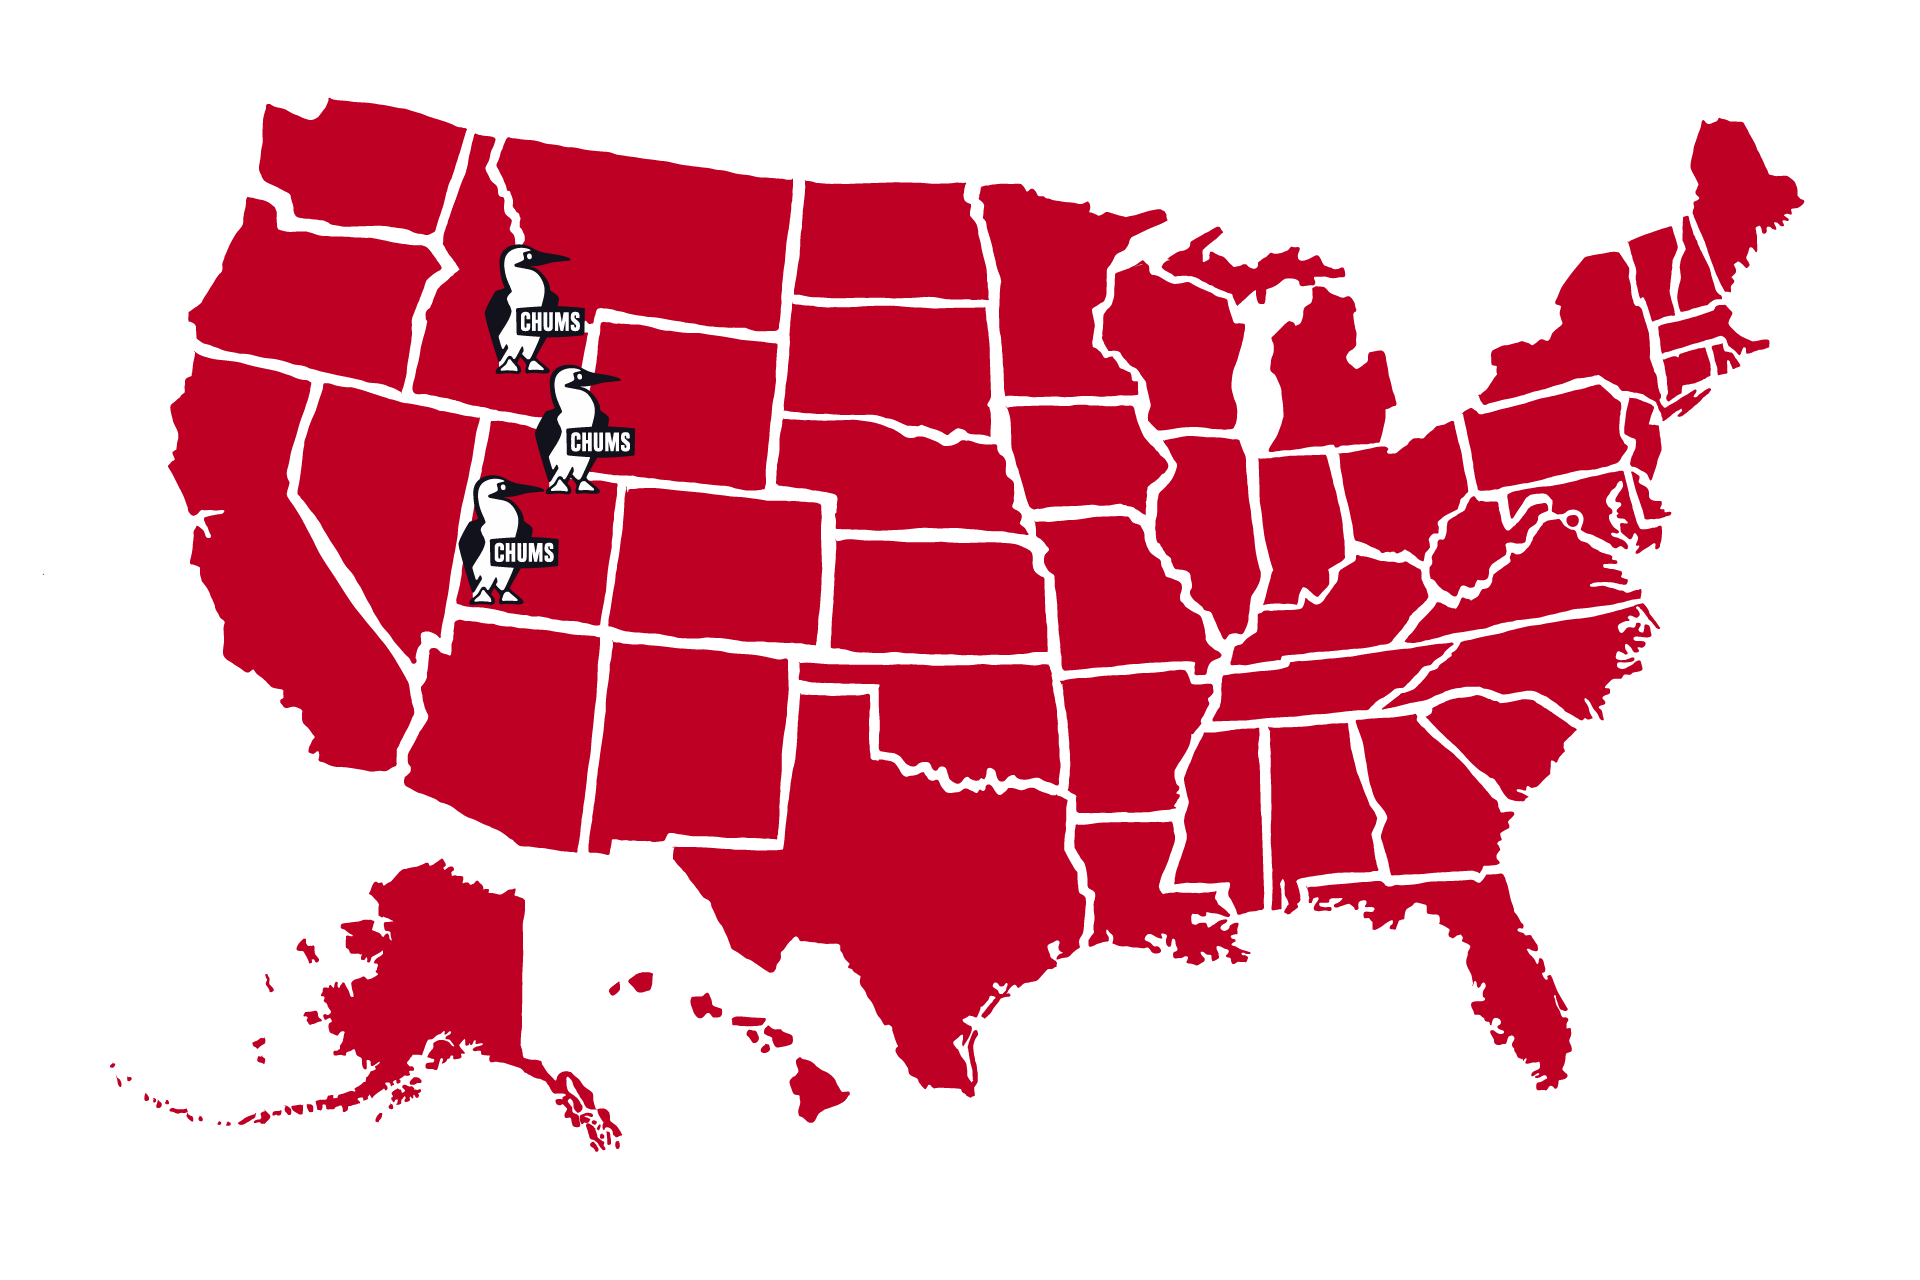 USA Map with Chums Locations